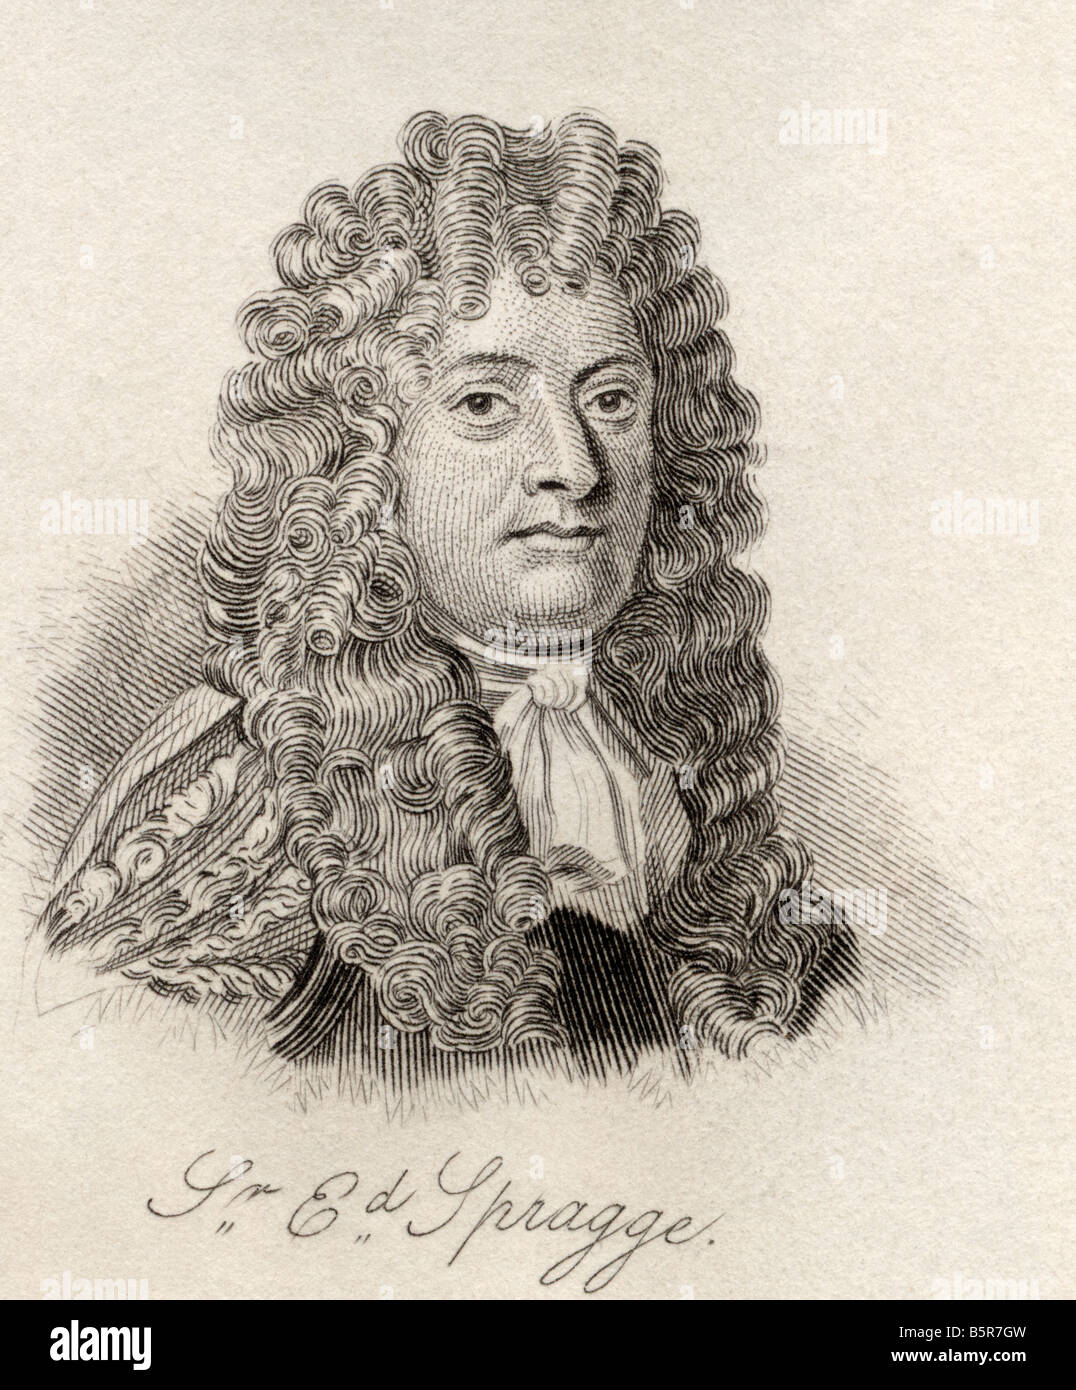 Sir Edward Spragge, c.1629 -1673. English admiral. From the book Crabb's Historical Dictionary, published 1825. Stock Photo